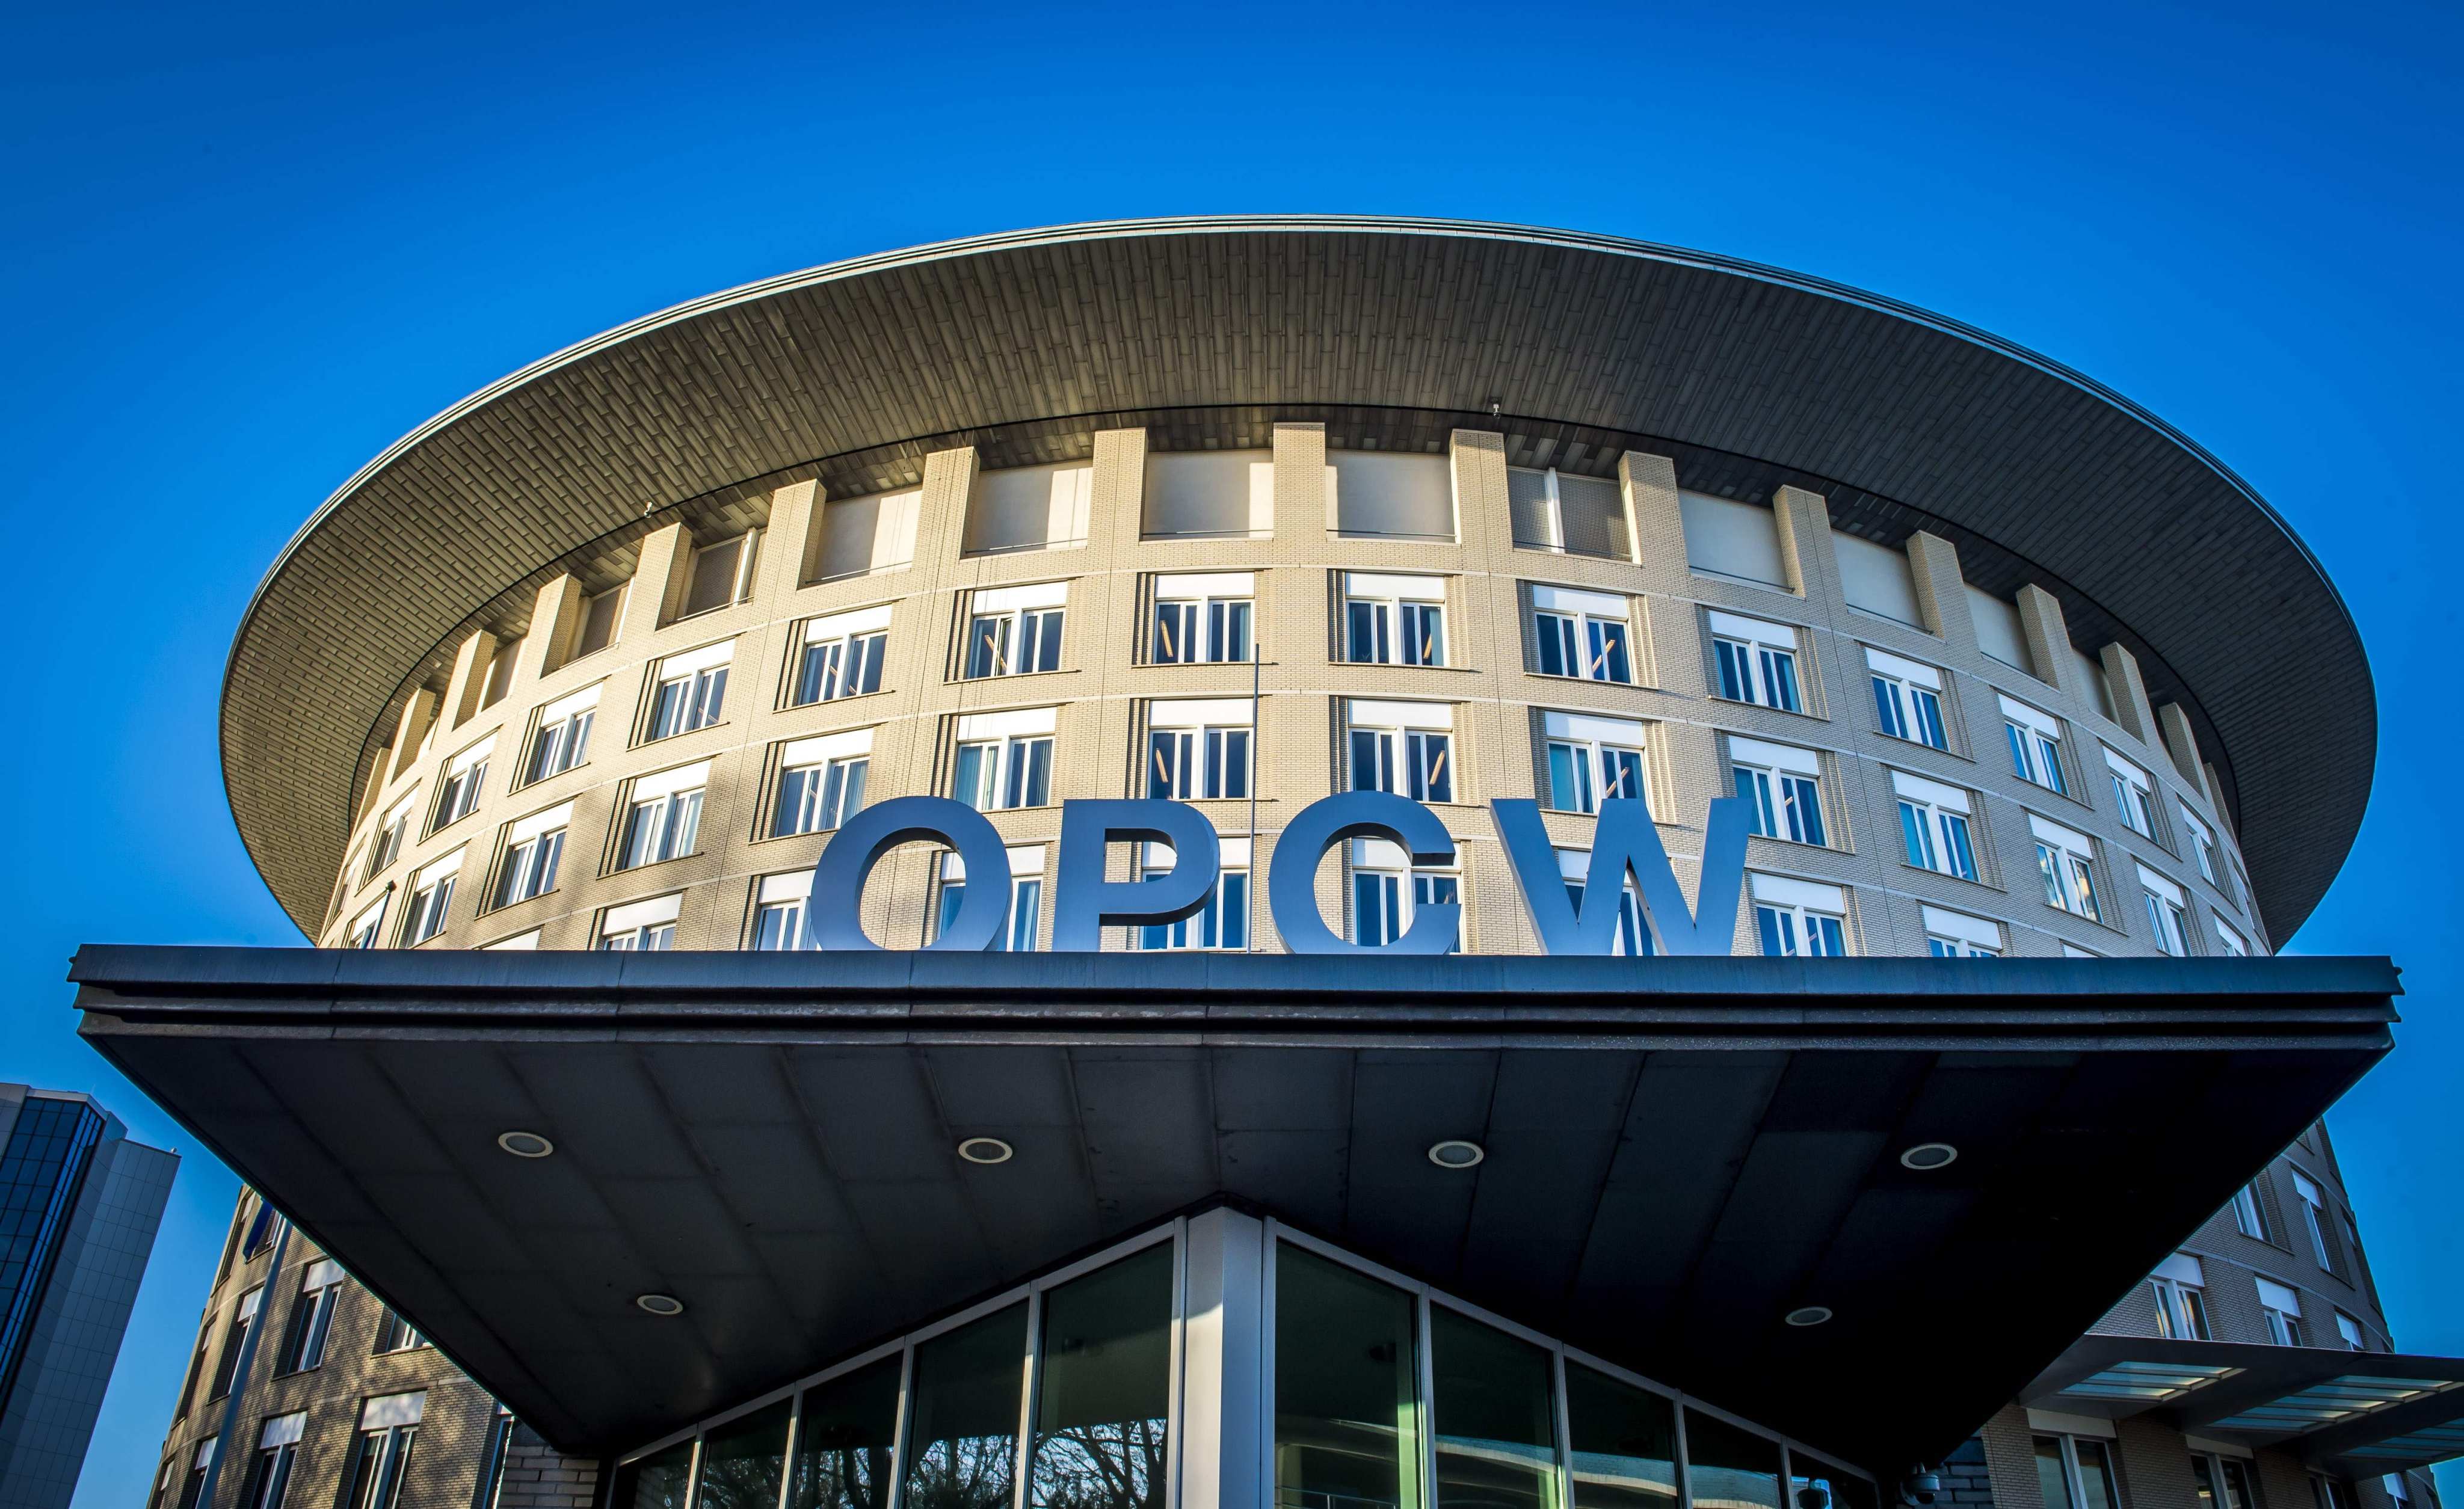 The Organisation for the Prohibition of Chemical Weapons (OPCW) building in The Hague. Photo: AFP